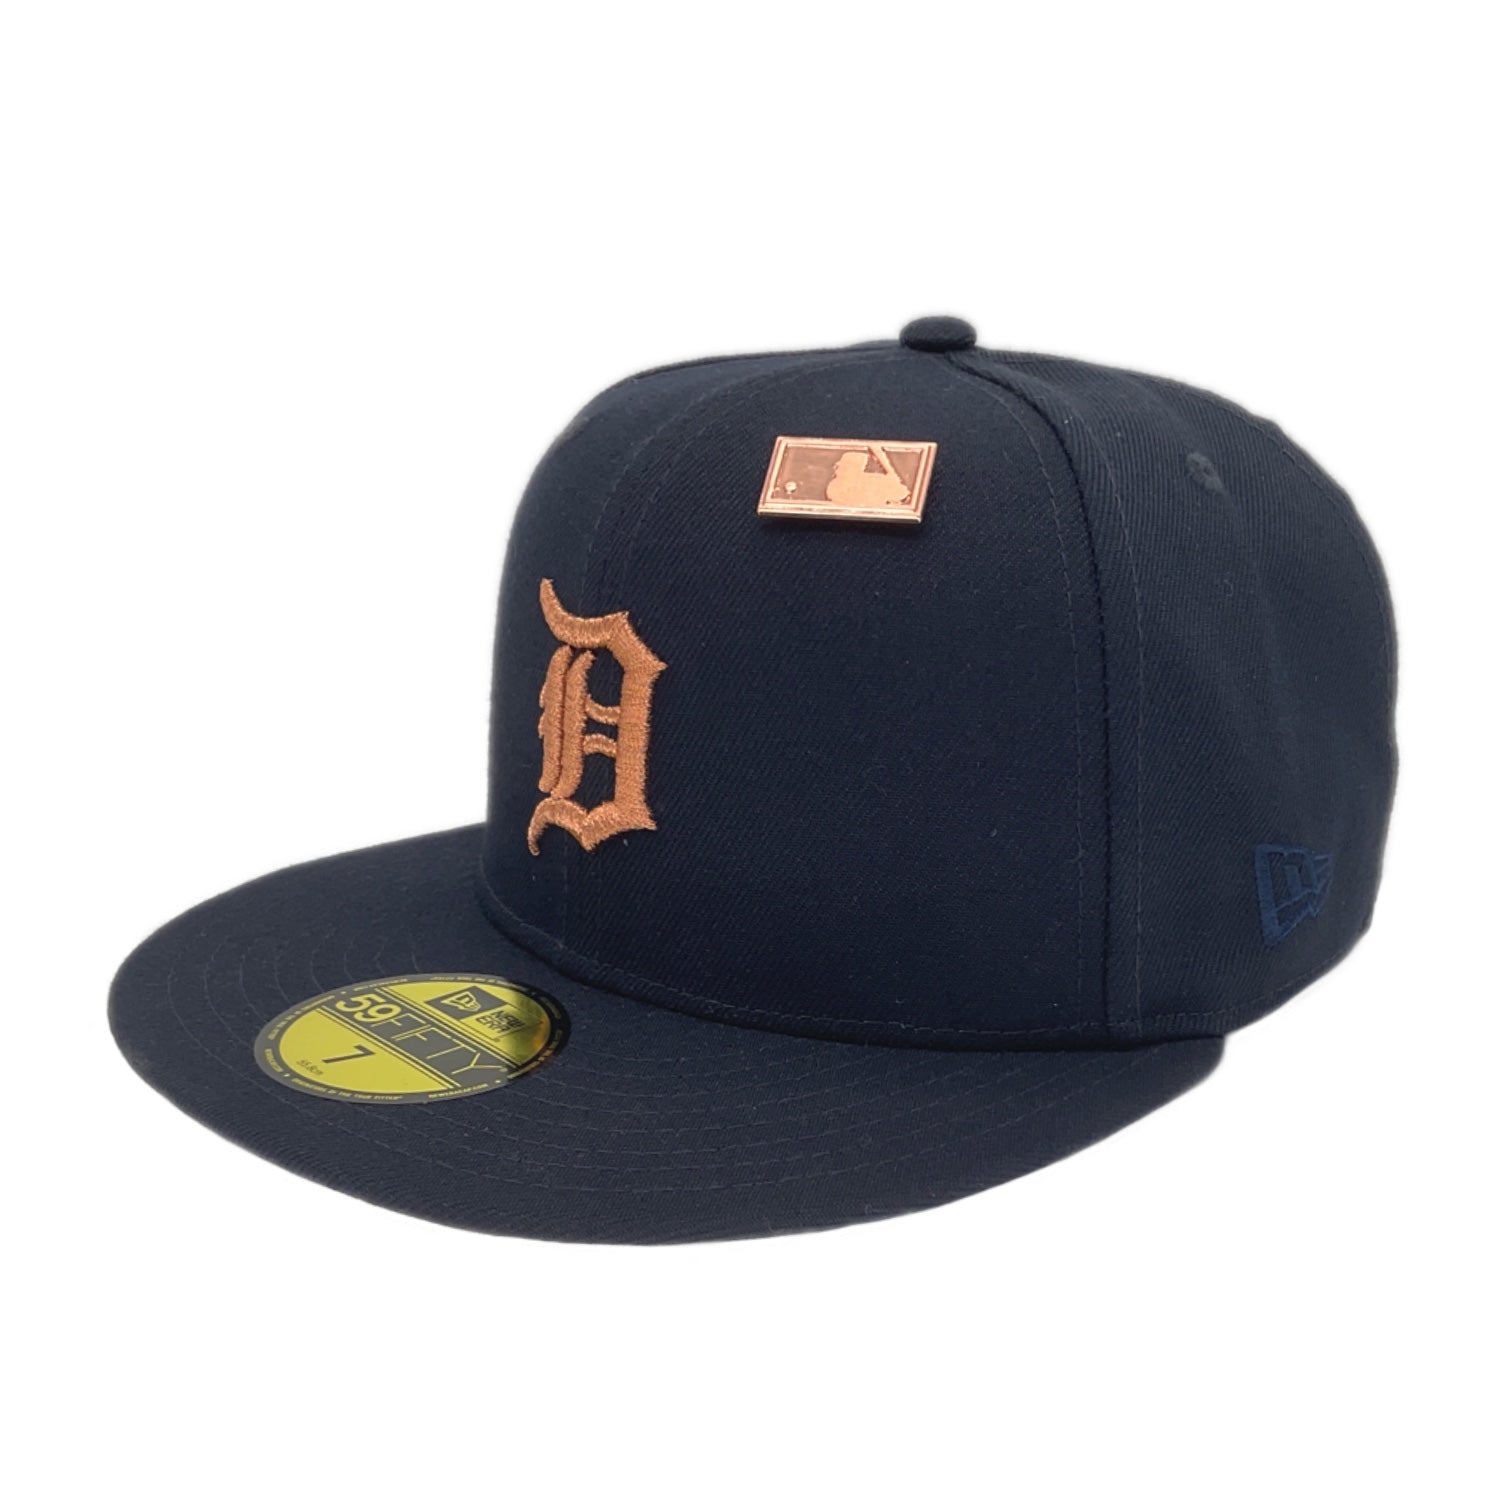 Reno Aces – JustFitteds